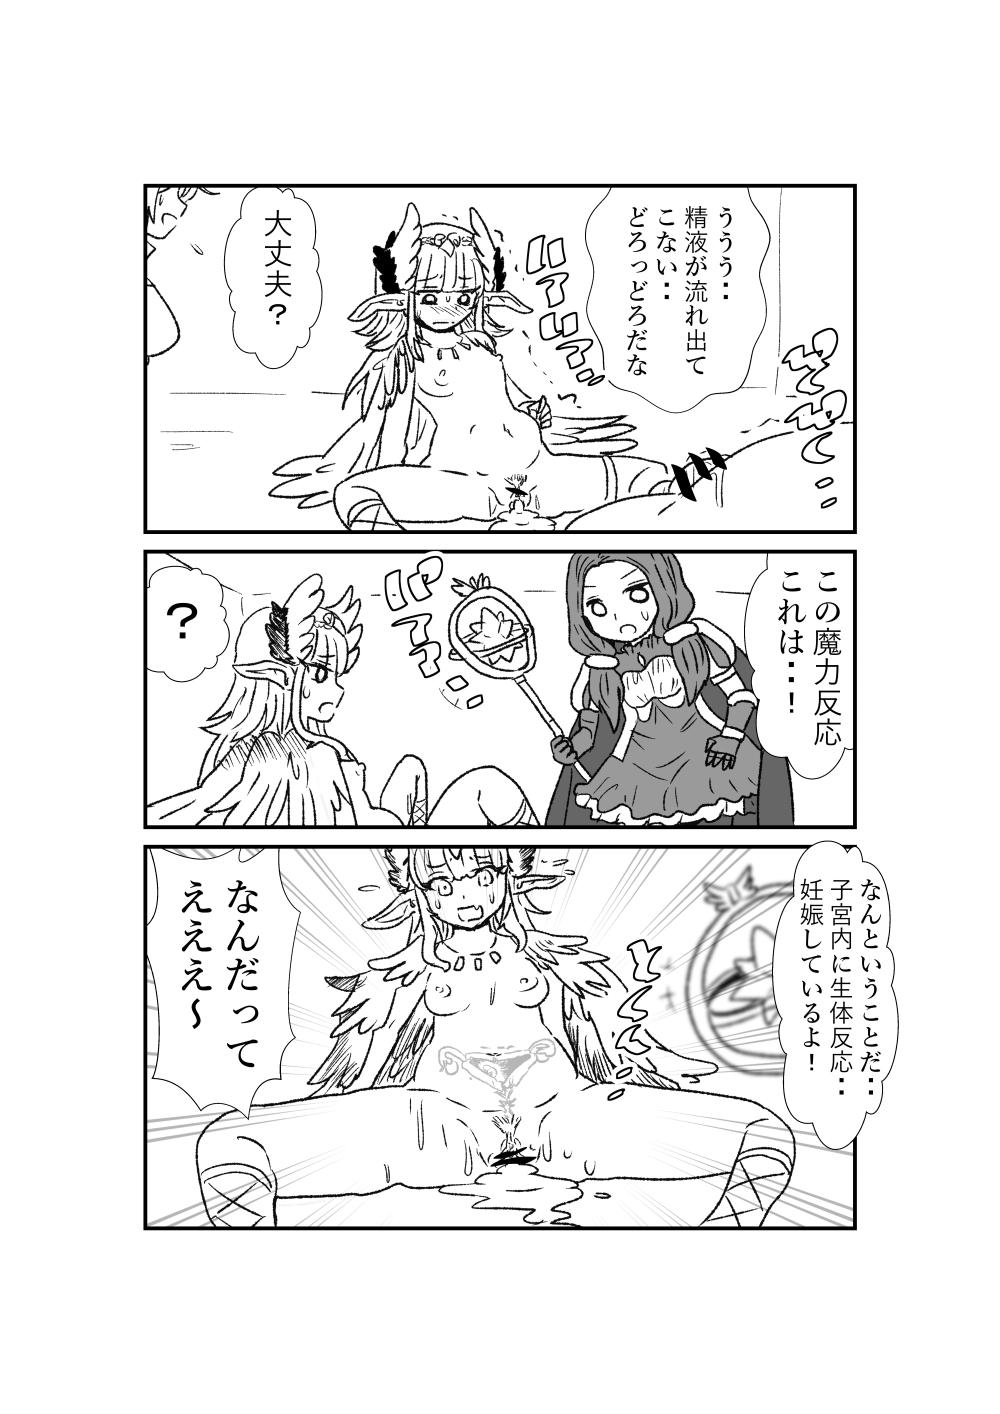 Nena FPO~桃色林檎の種付け周回～ - Fate grand order Freak - Page 8